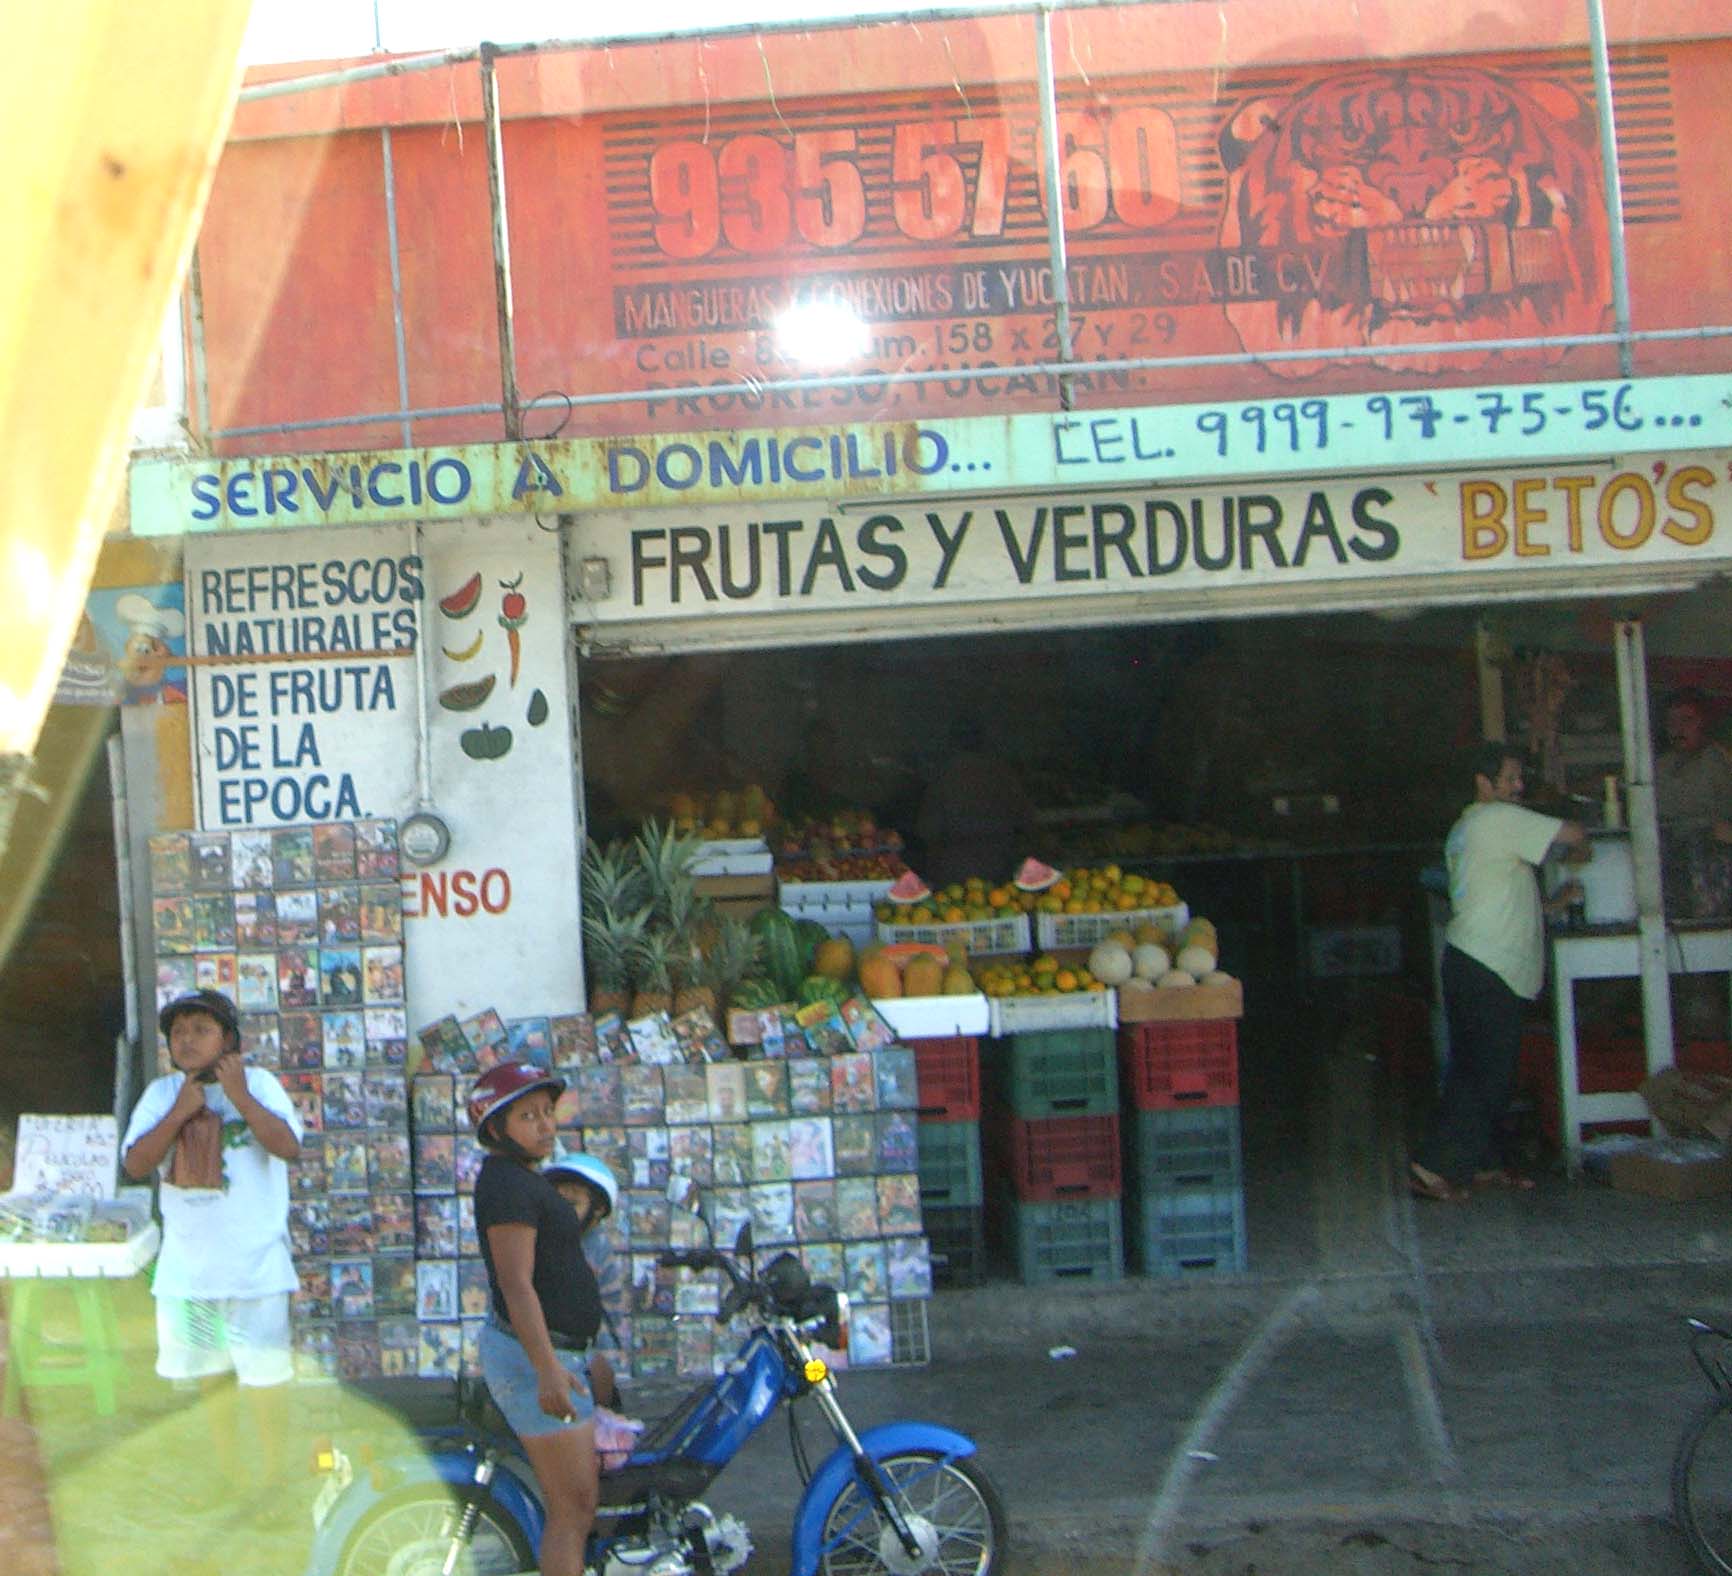 A shop in Progresso, Mexico with a sign "Frutas Y Verduras", seen out of a bus window on the way to Chichen Itza.